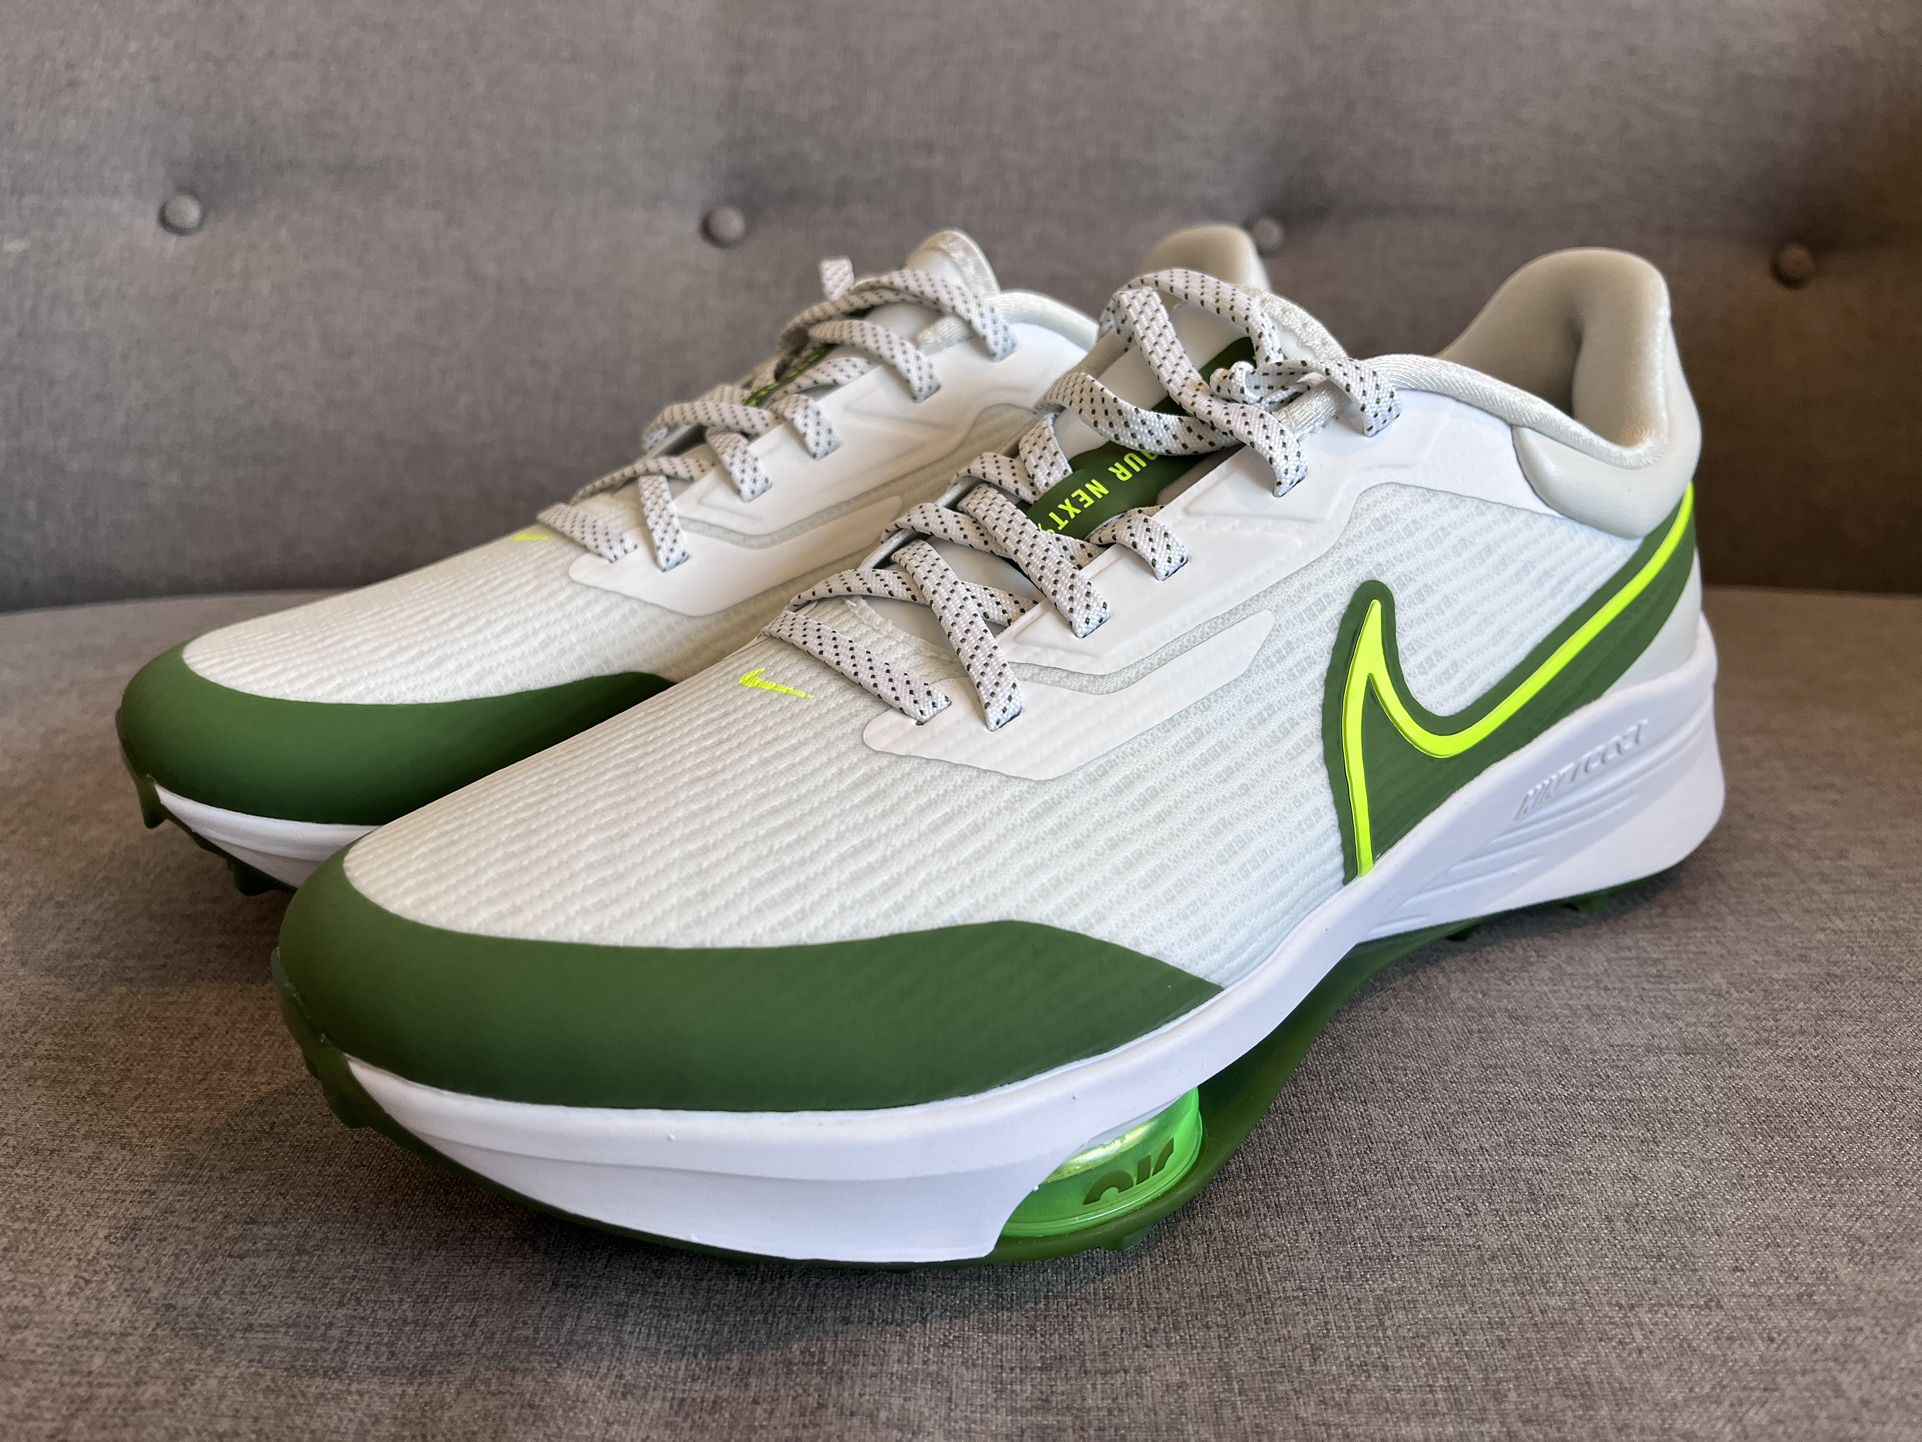 Nike Air Zoom Infinity Tour NXT% Golf Shoes Mens 9.5 for Sale in